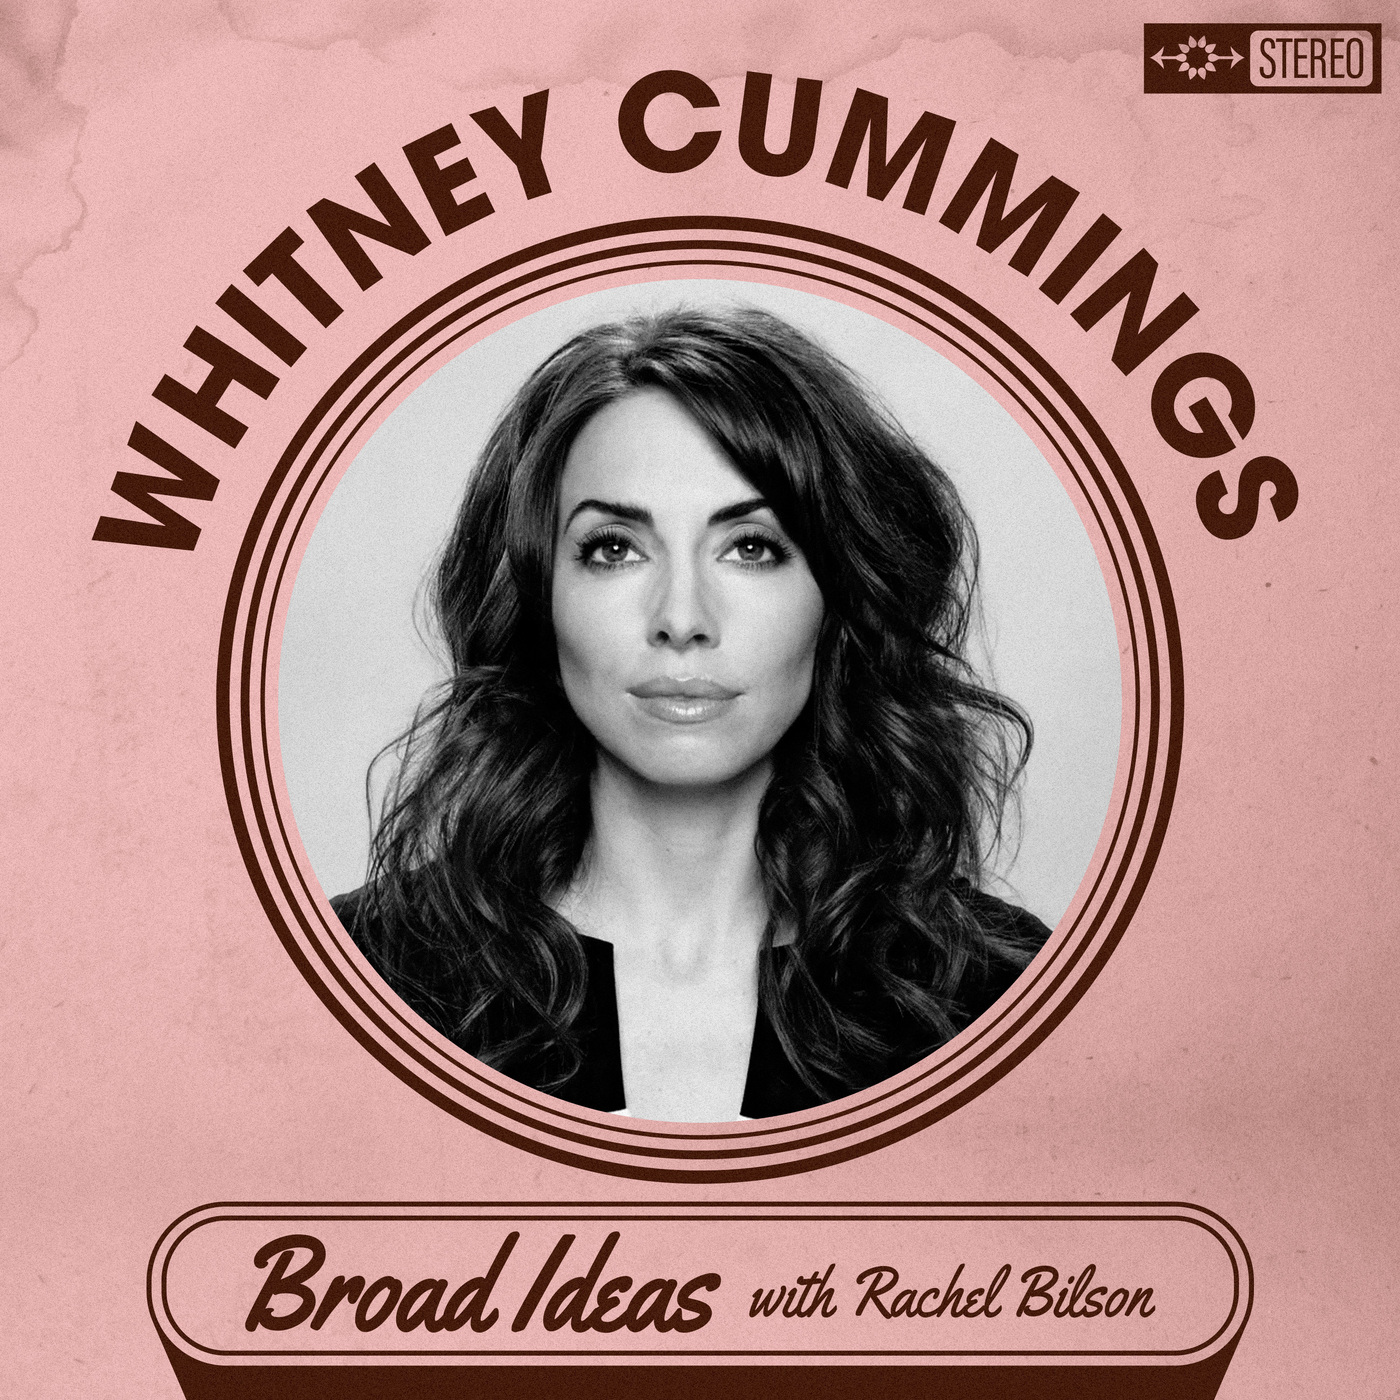 Whitney Cummings on Freezing her Eggs, One Year of Celibacy, and Addiction